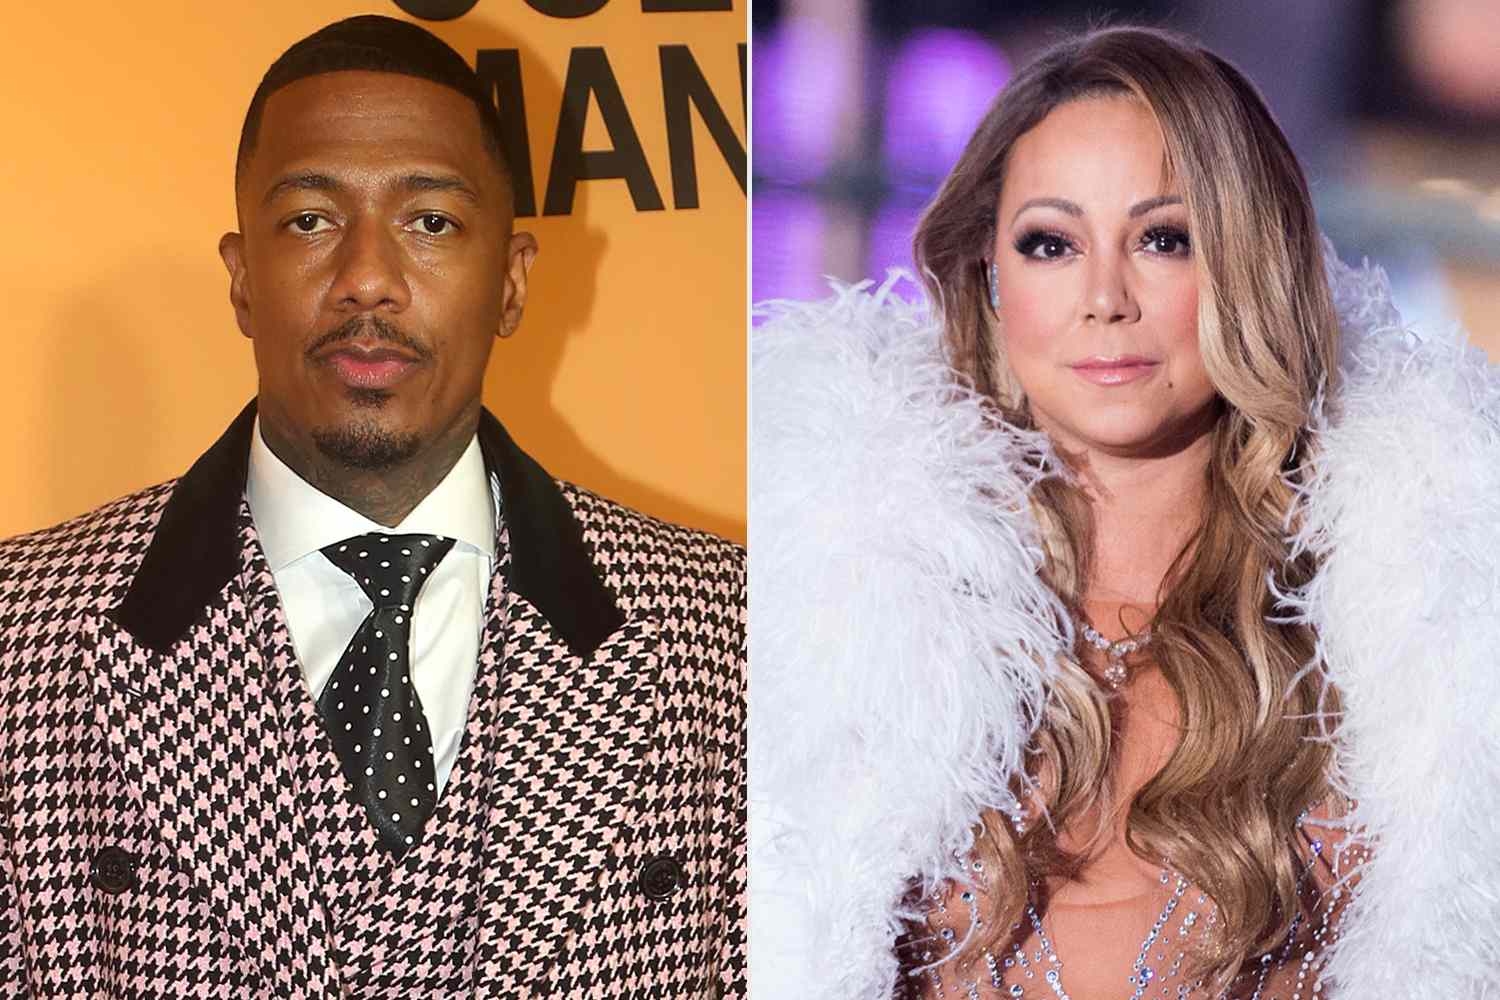 Nick Cannon Says He Would ‘Still Go Hard’ For His Ex-Wife Mariah Carey And ‘Lay Down’ His Life For Her [Video]